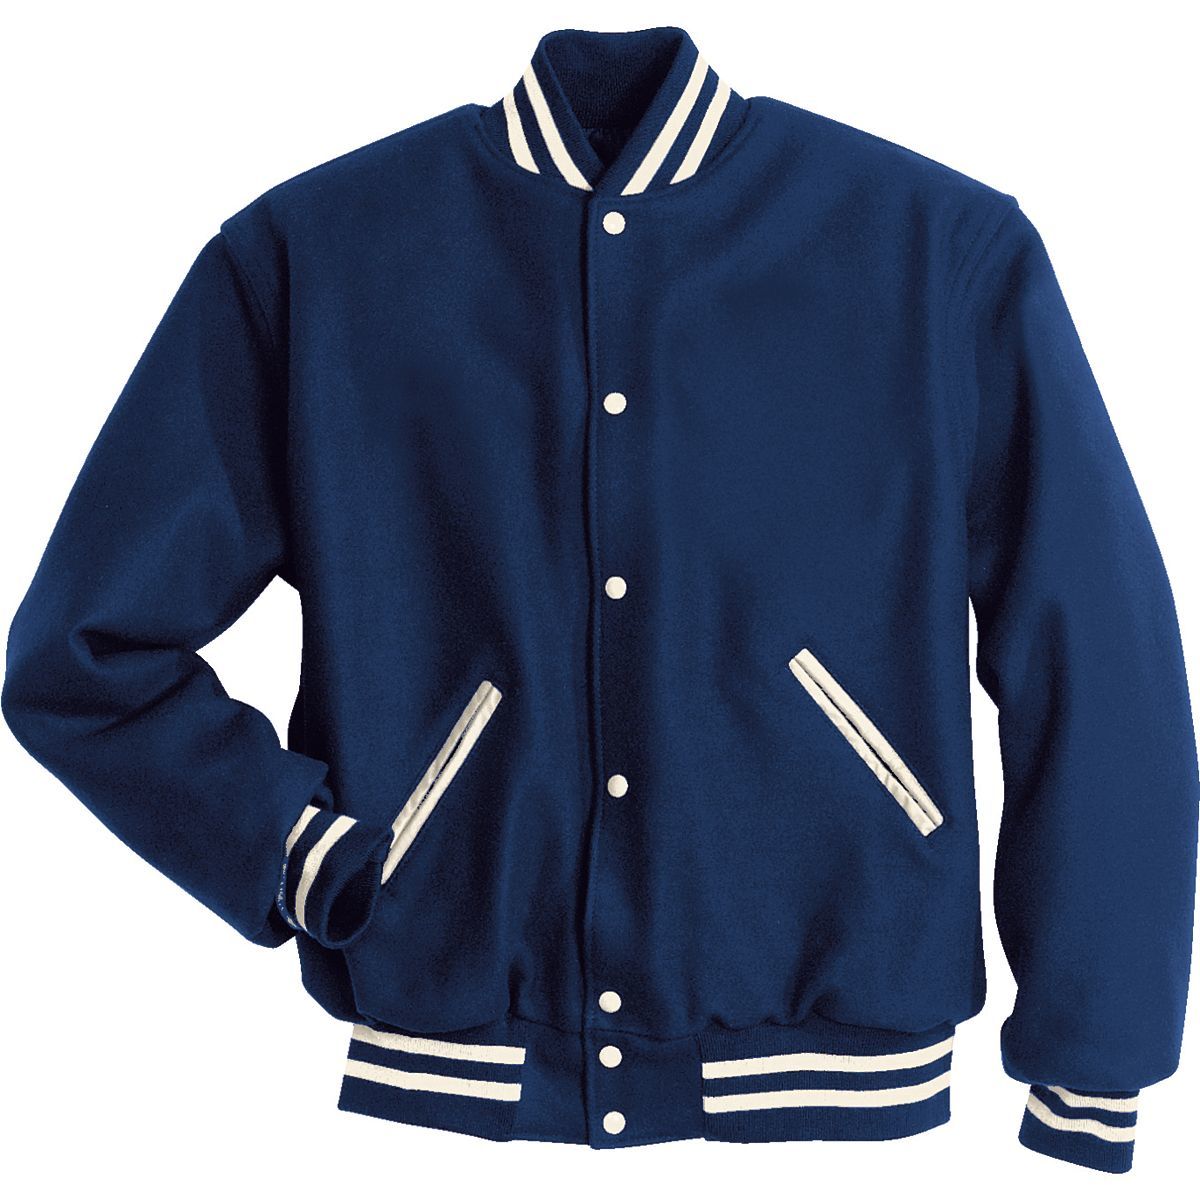 Holloway Letterman Jacket in Dark Royal/White  -Part of the Adult, Adult-Jacket, Holloway, Outerwear product lines at KanaleyCreations.com